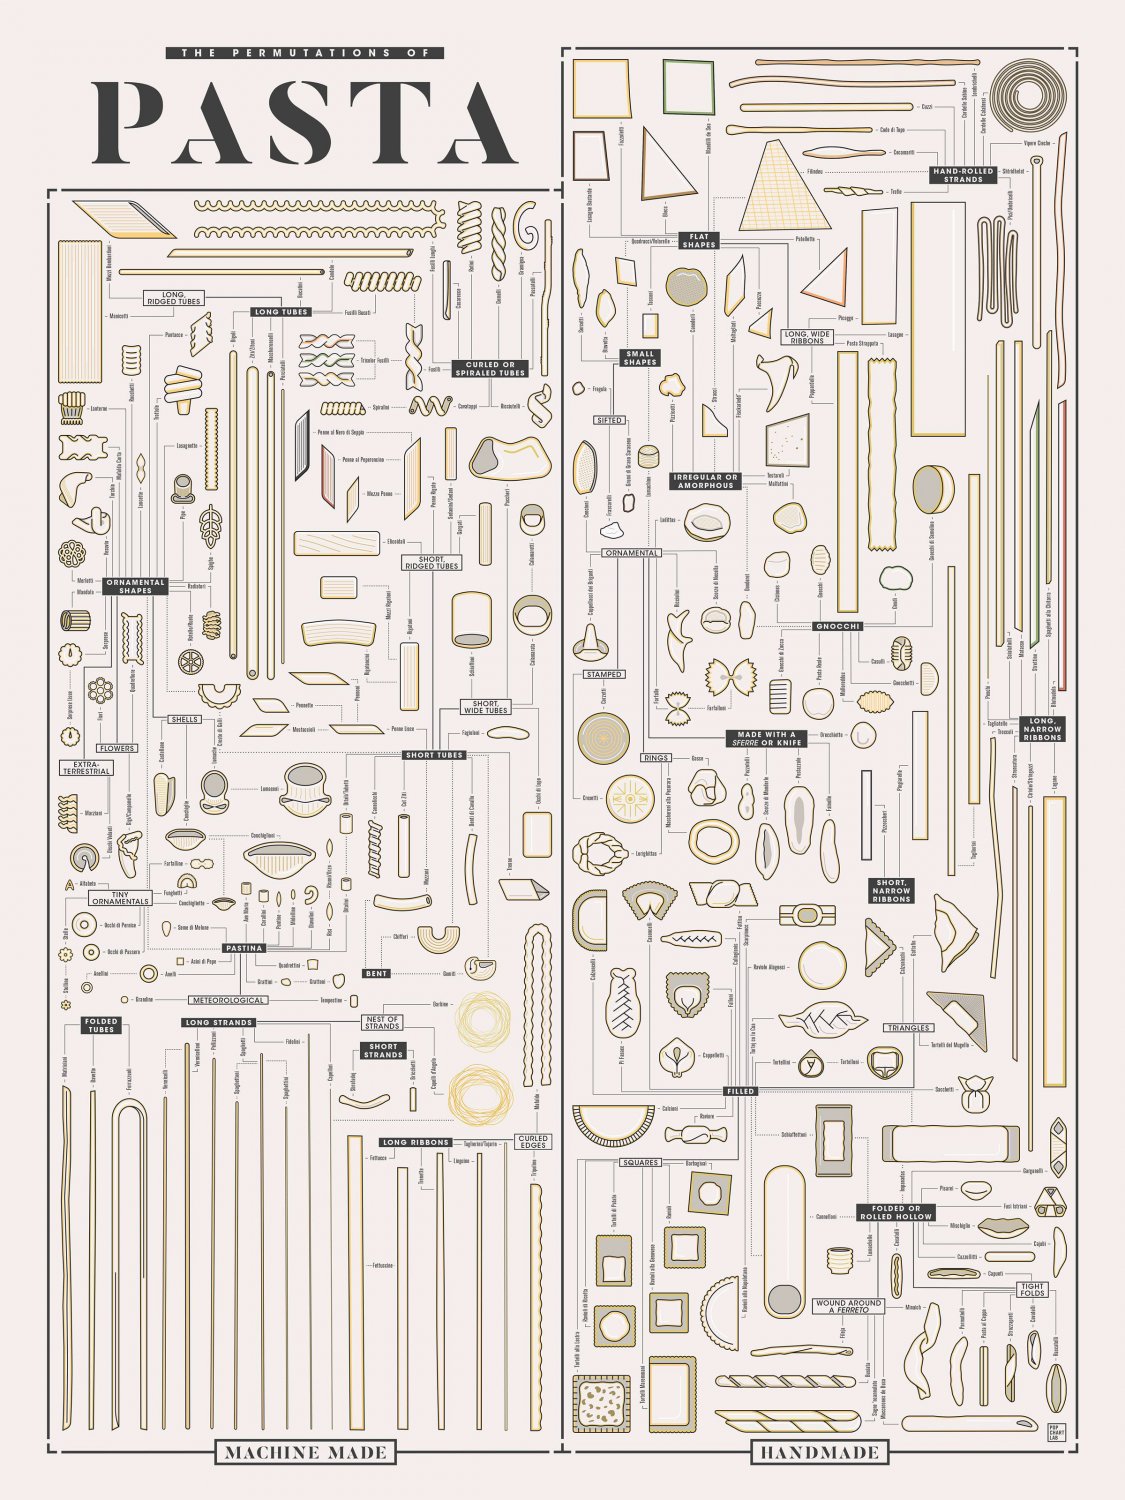 Different kinds of Pasta shapes Chart  18"x28" (45cm/70cm) Poster